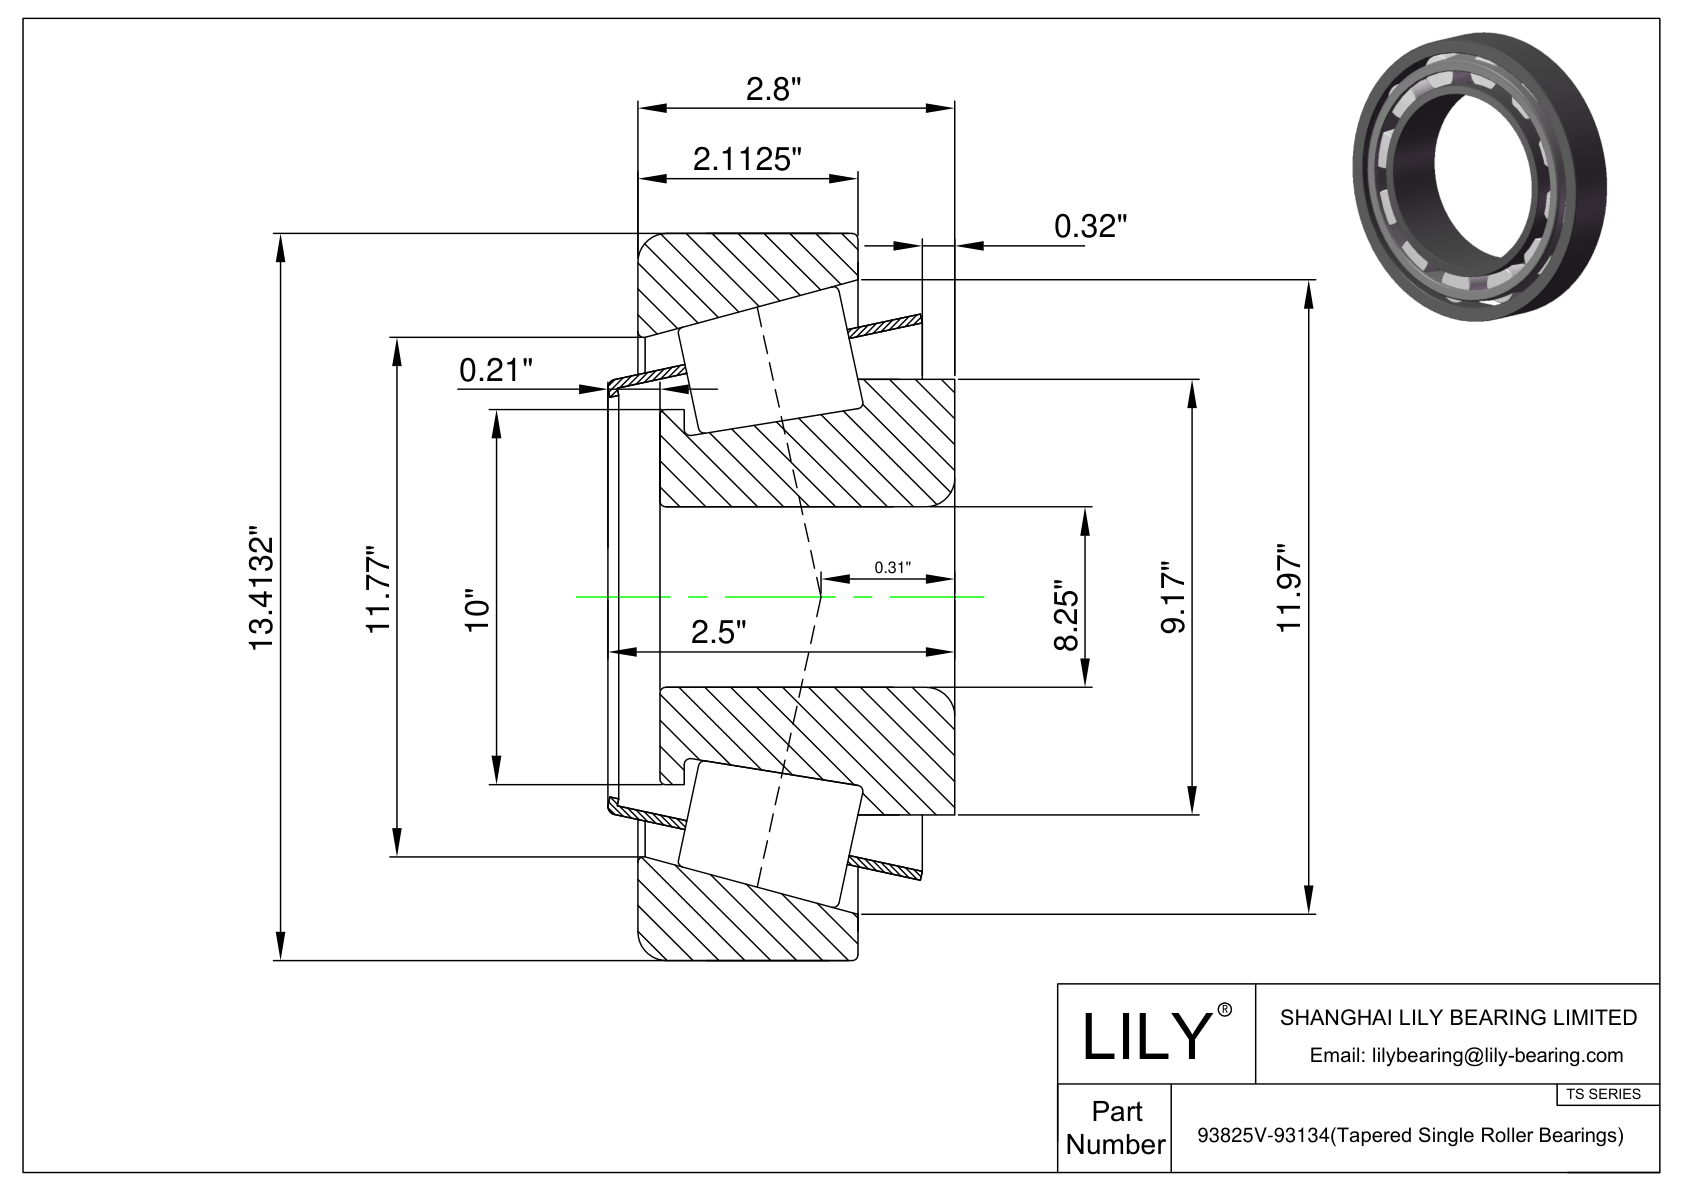 93825V-93134 TS (Tapered Single Roller Bearings) (Imperial) cad drawing